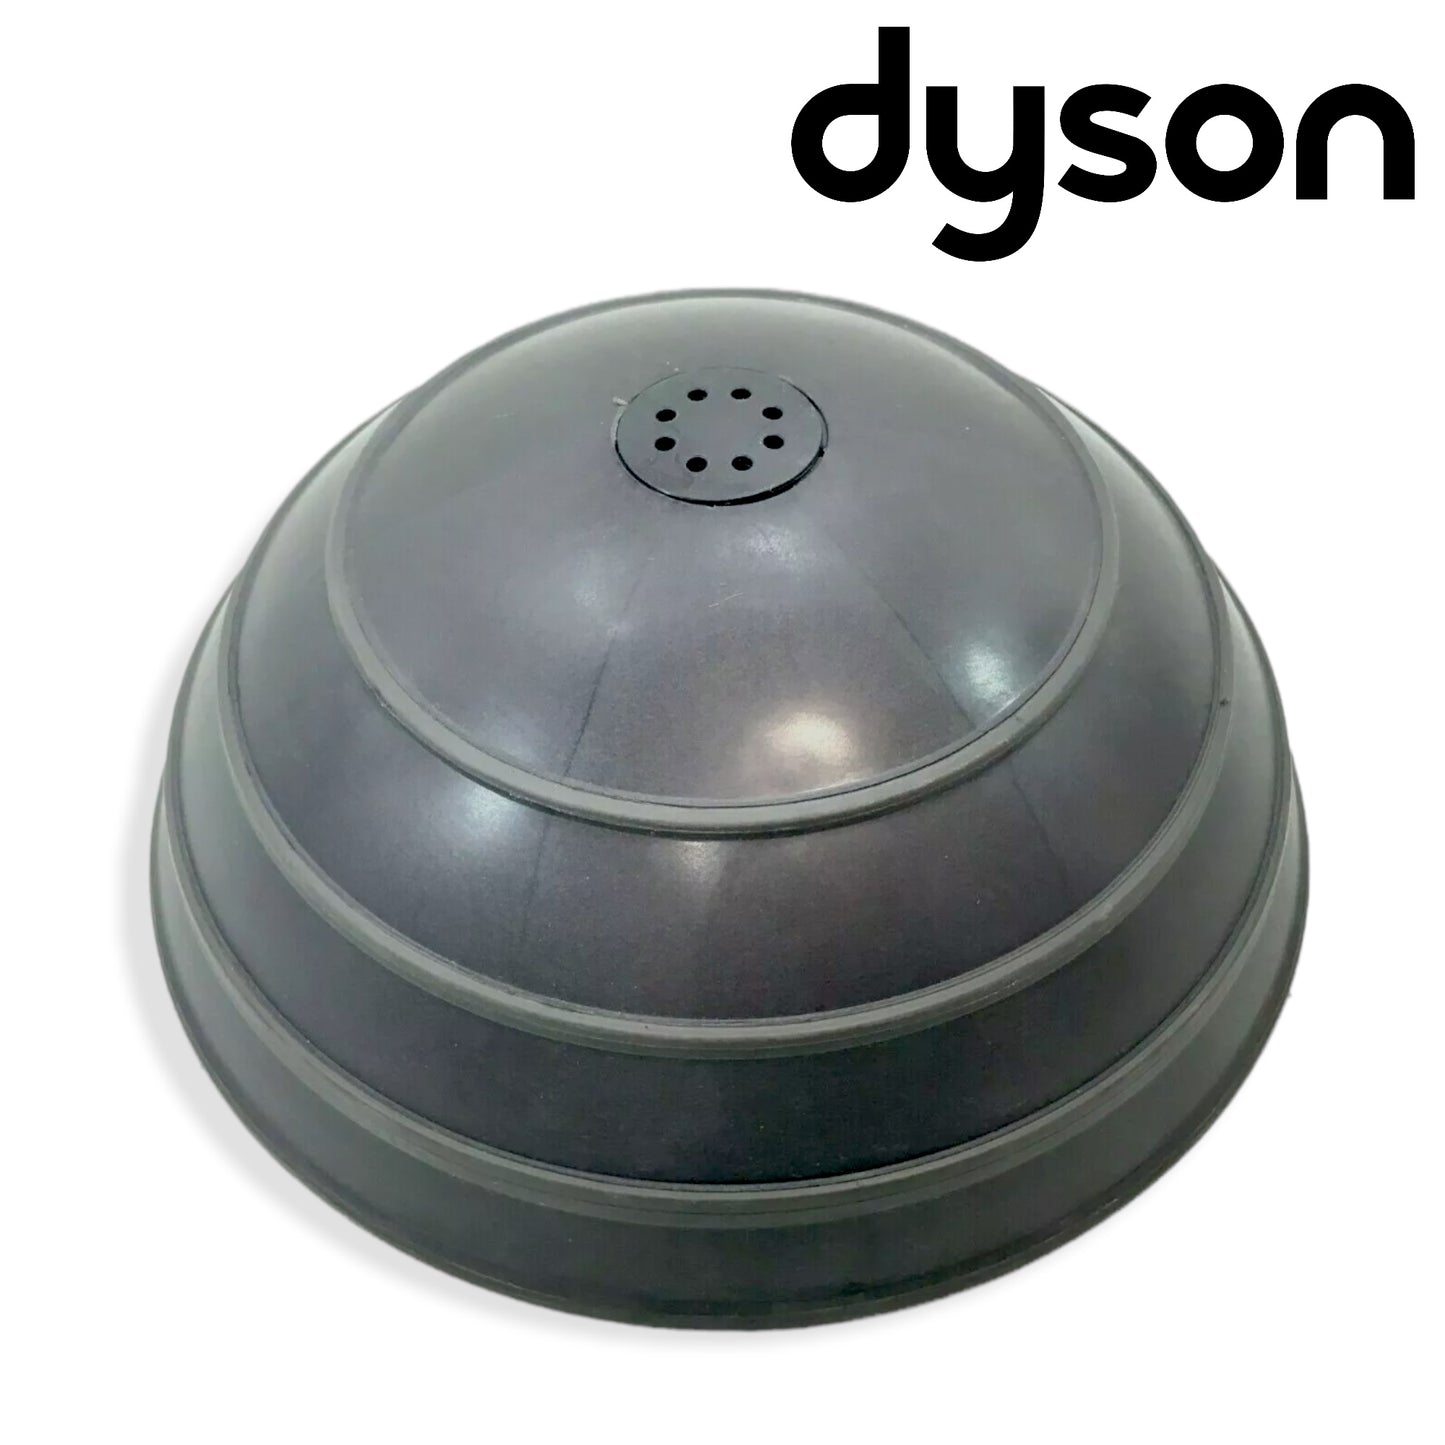 New GENUINE Dyson UP13 DC41 DC65 DC66 Ball SHELL COVER Non-Filter Side 920772-03